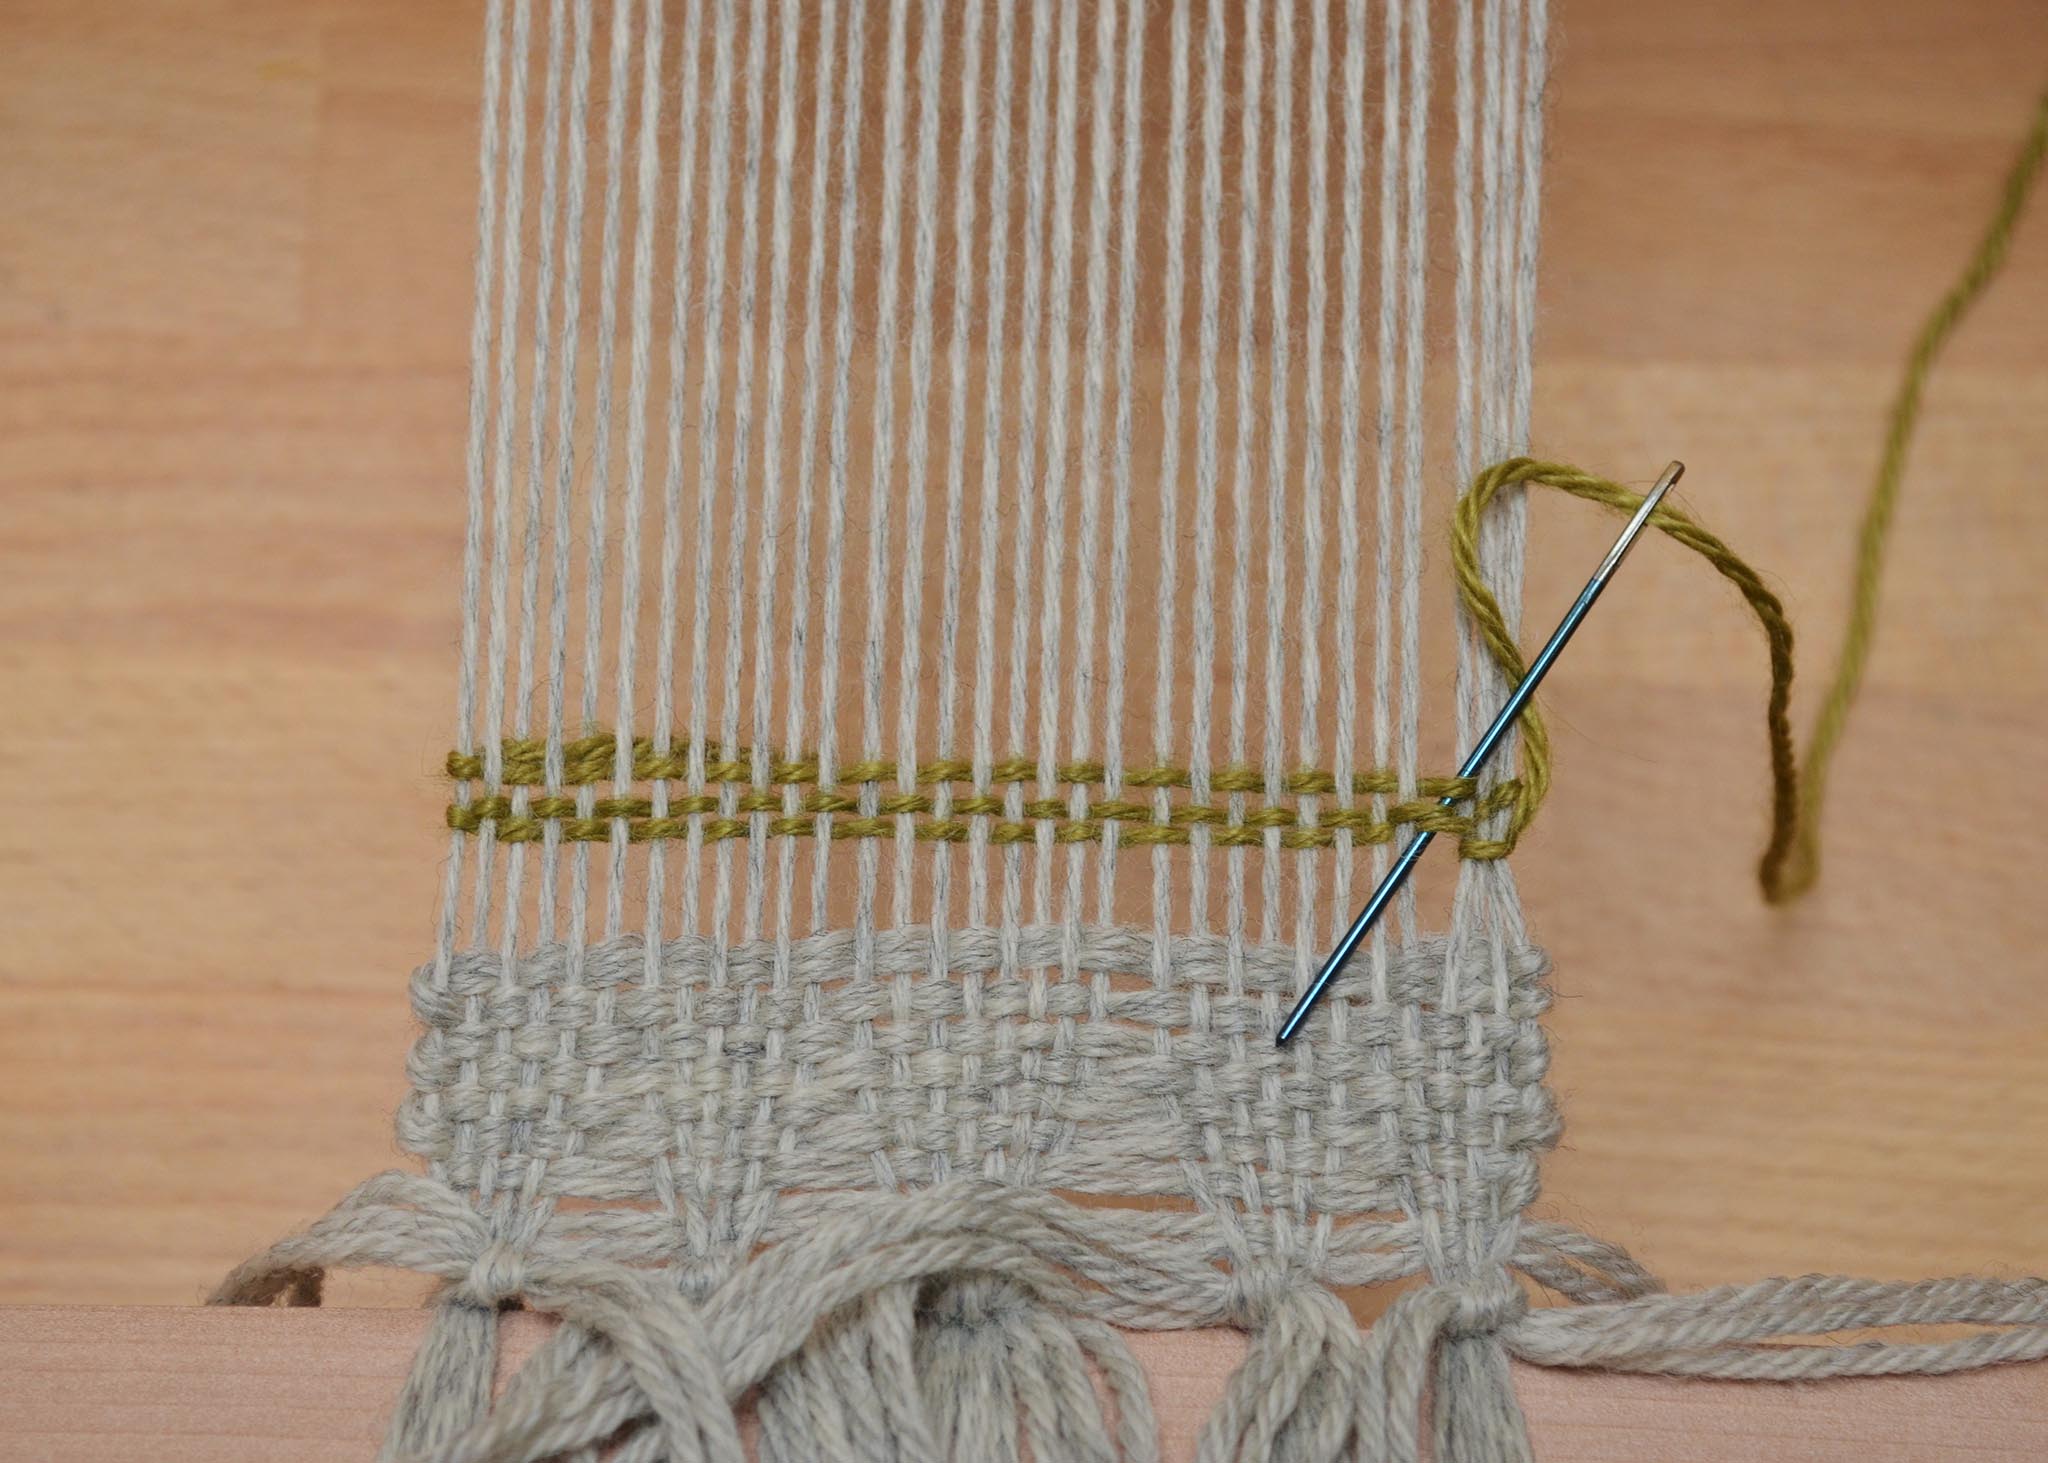 How to Hemstitch Weaving Projects on the Loom